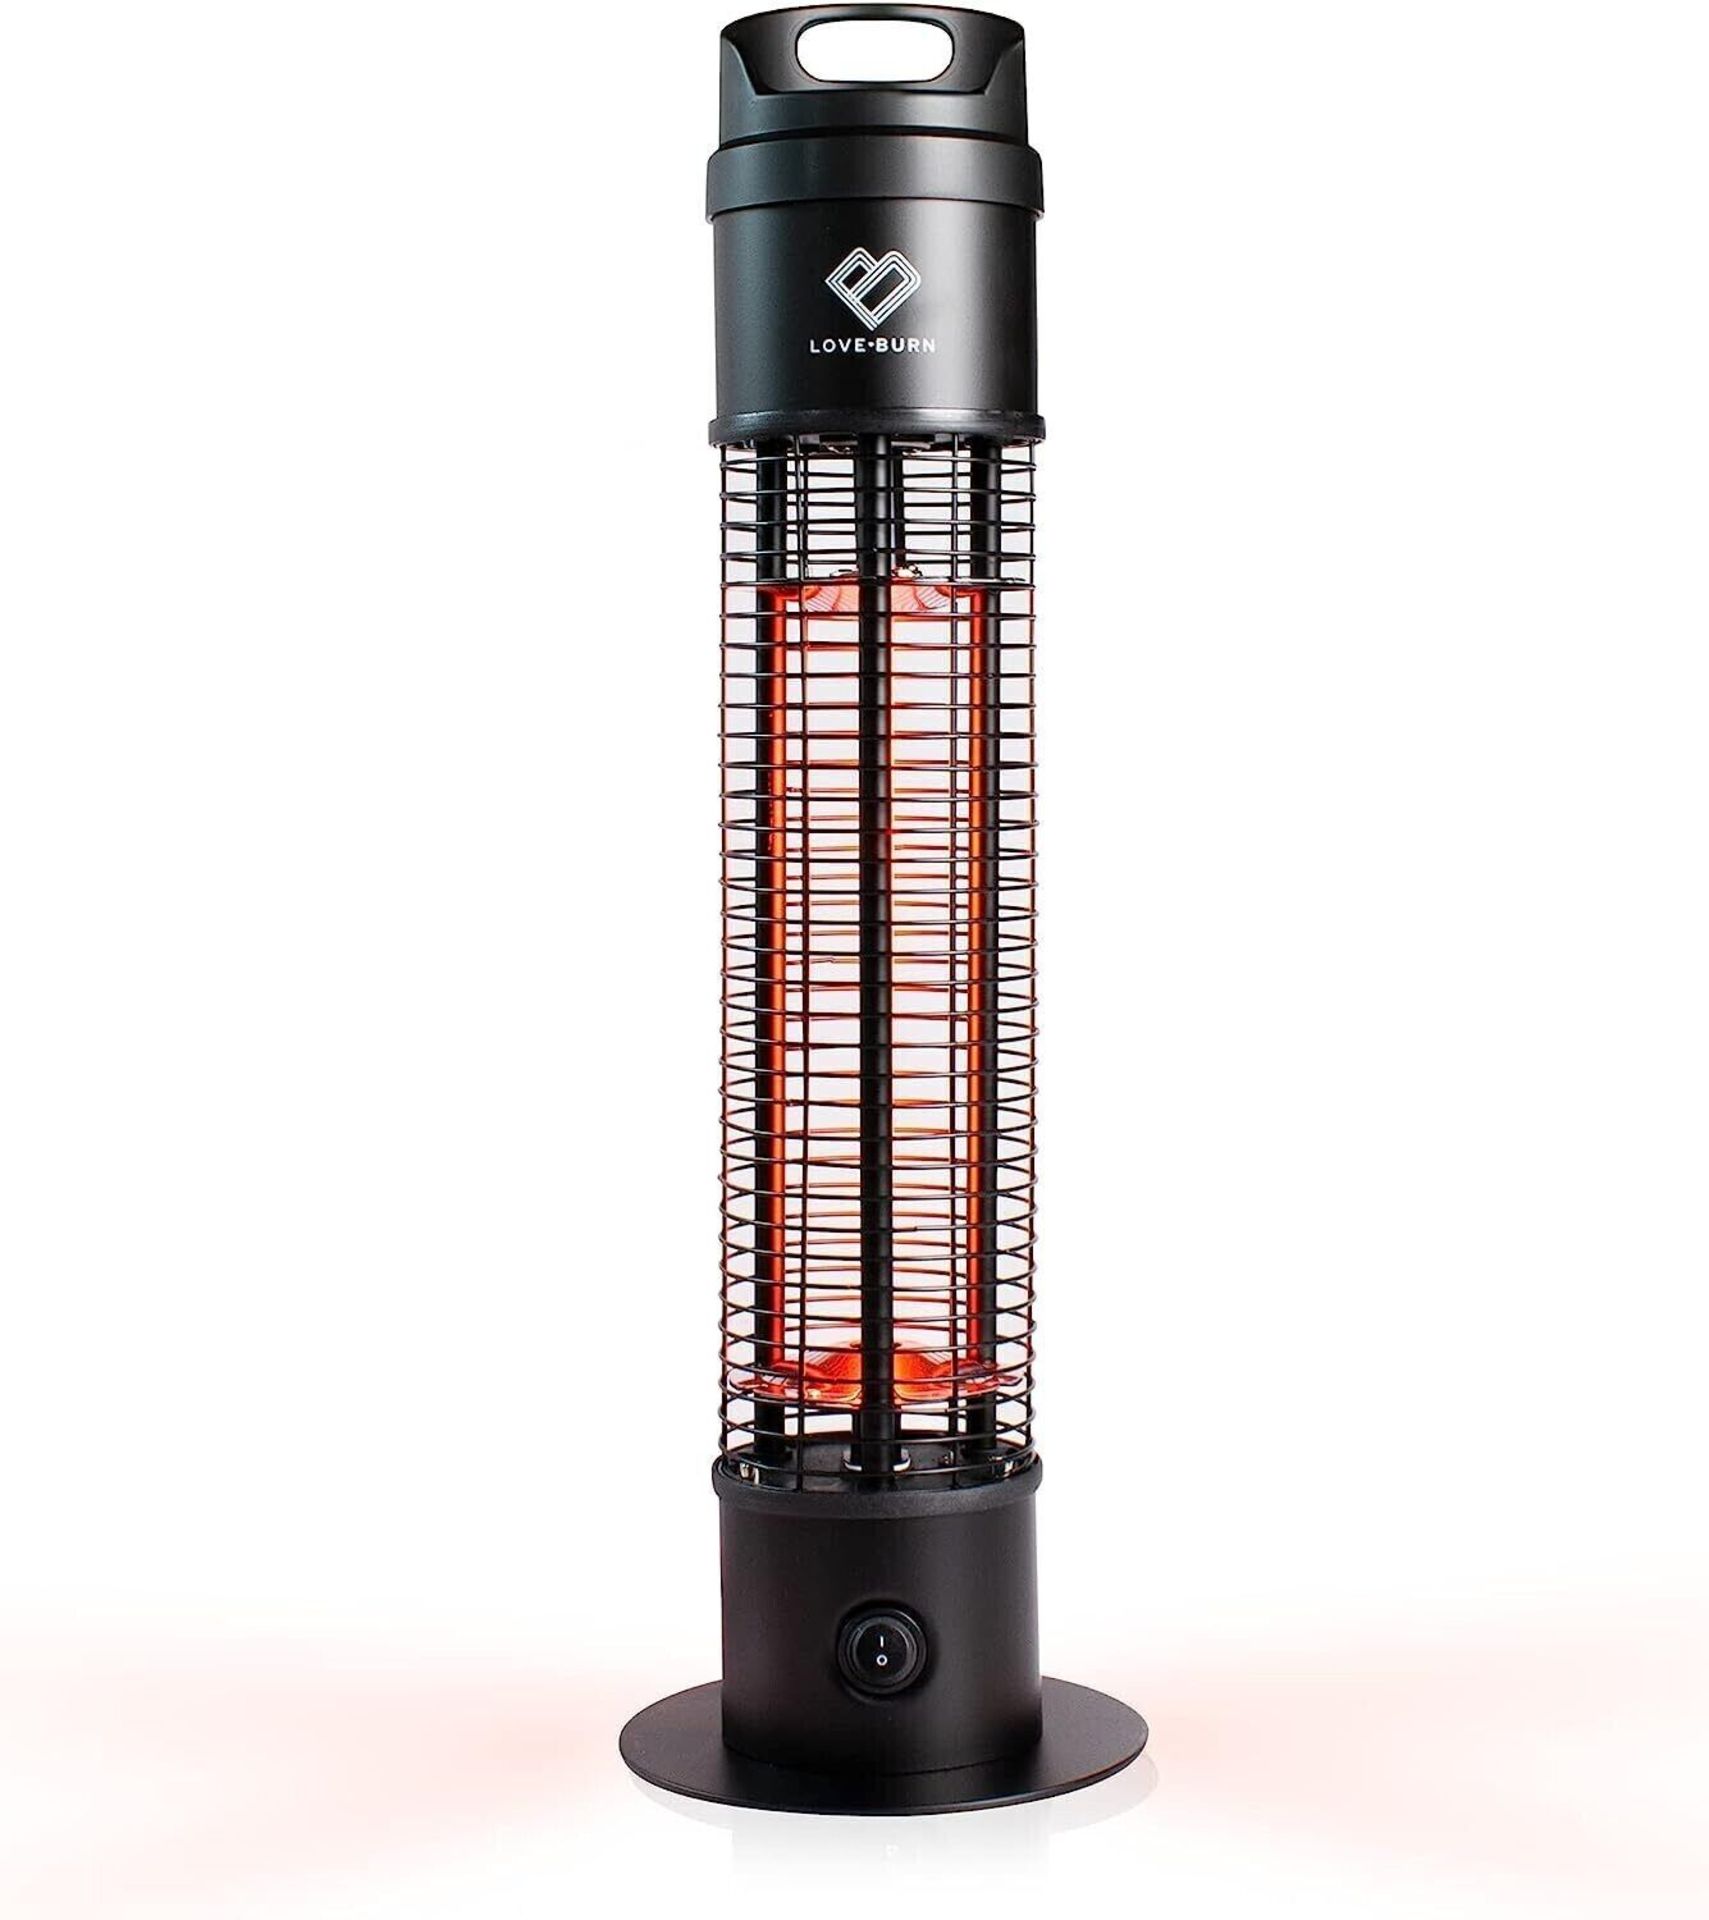 10 x Love Burn 1200W Portable Electric Patio Heater, Tabletop Freestanding Tower Heater